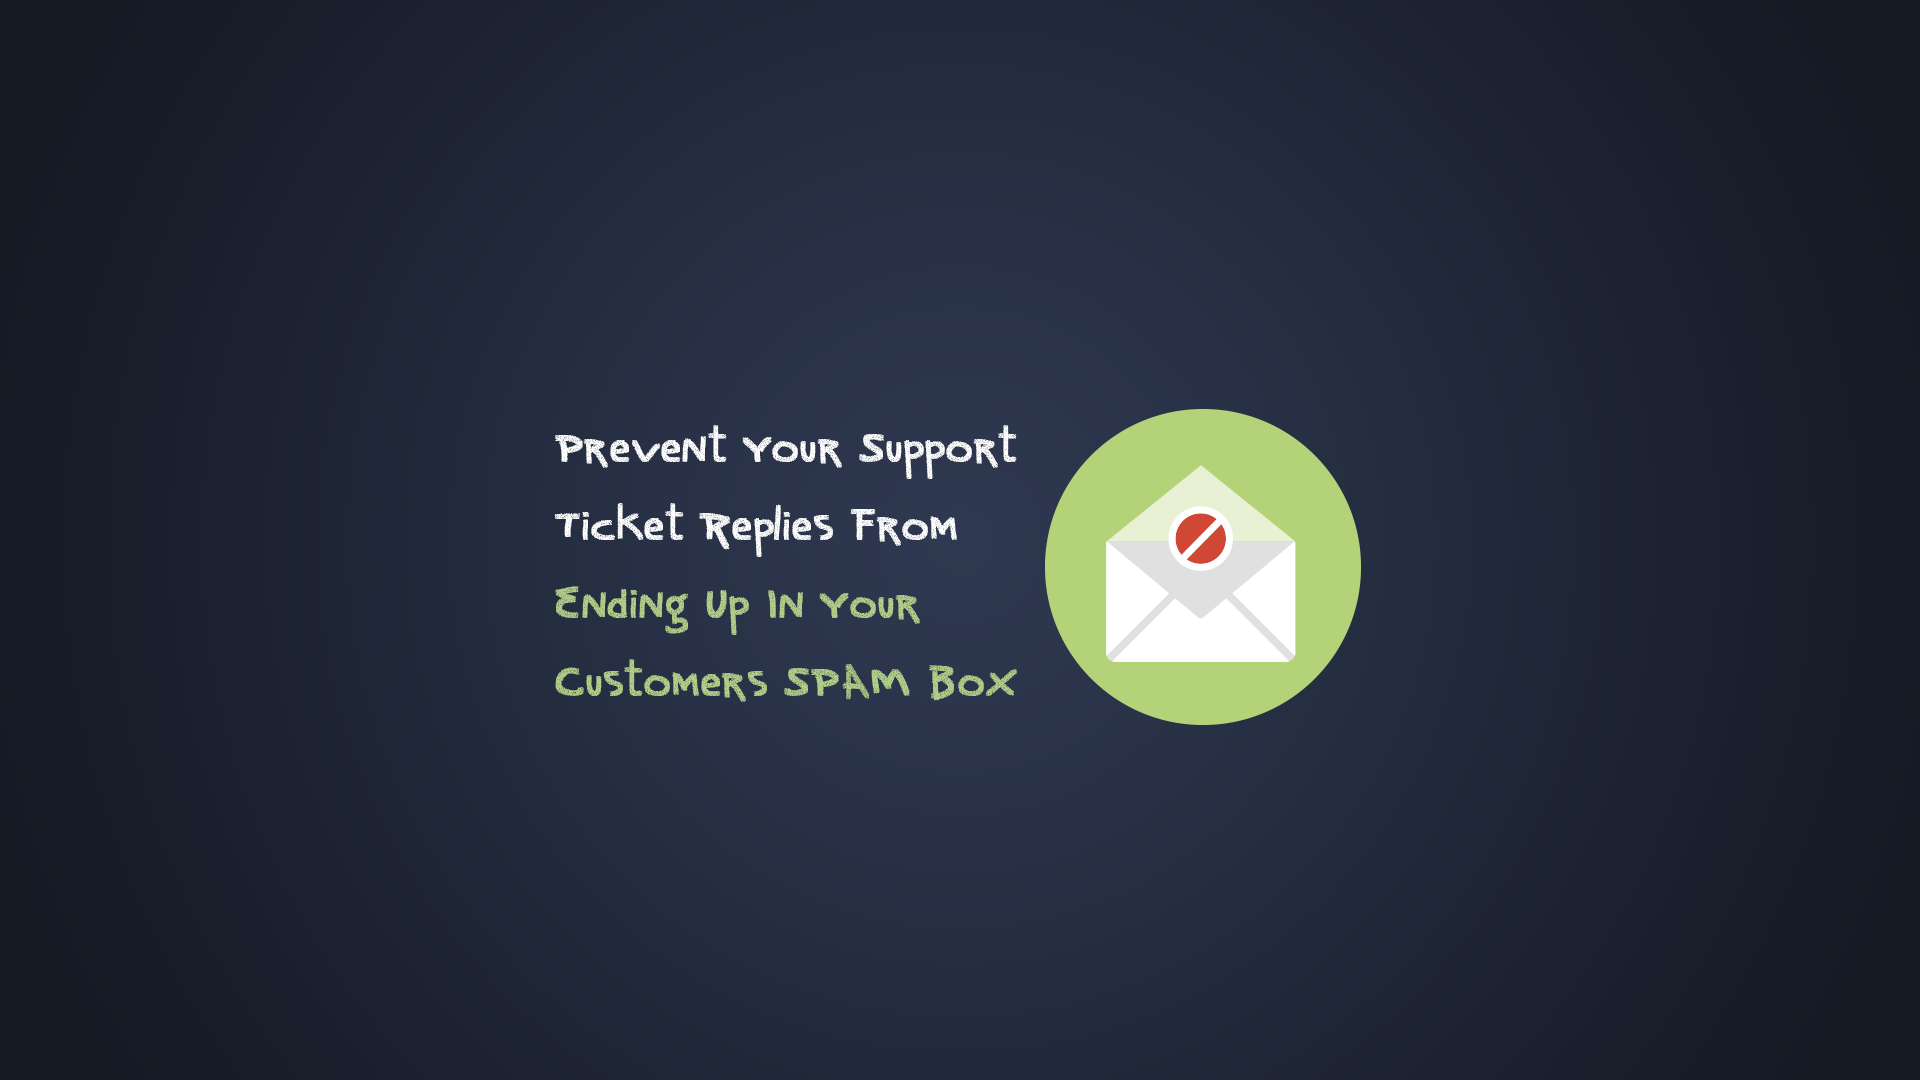 Prevent Your Support Ticket Replies From Ending Up In Your Customers SPAM Box